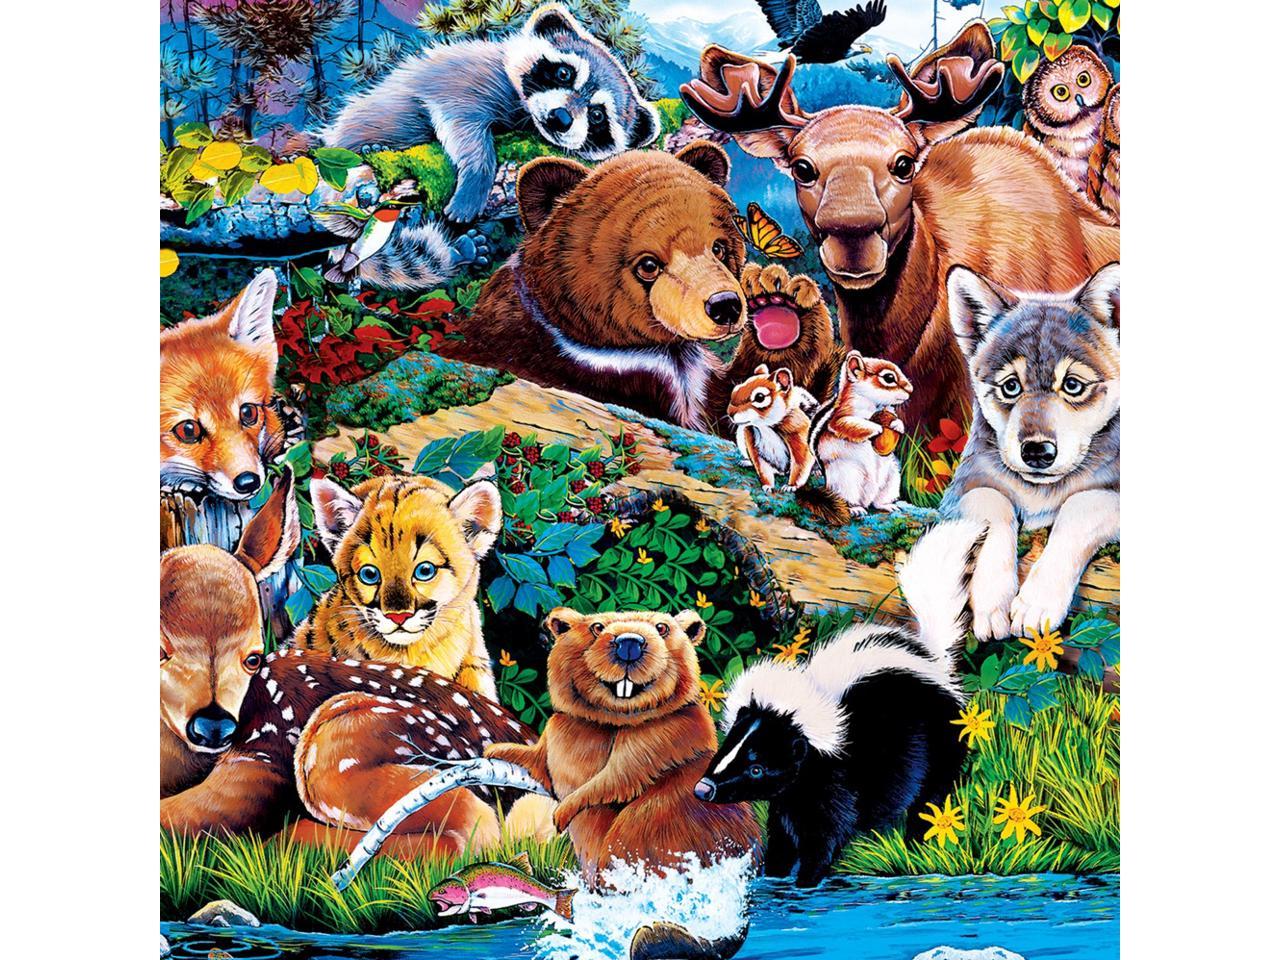 World of Animals 4 Pack 100 Piece Puzzles